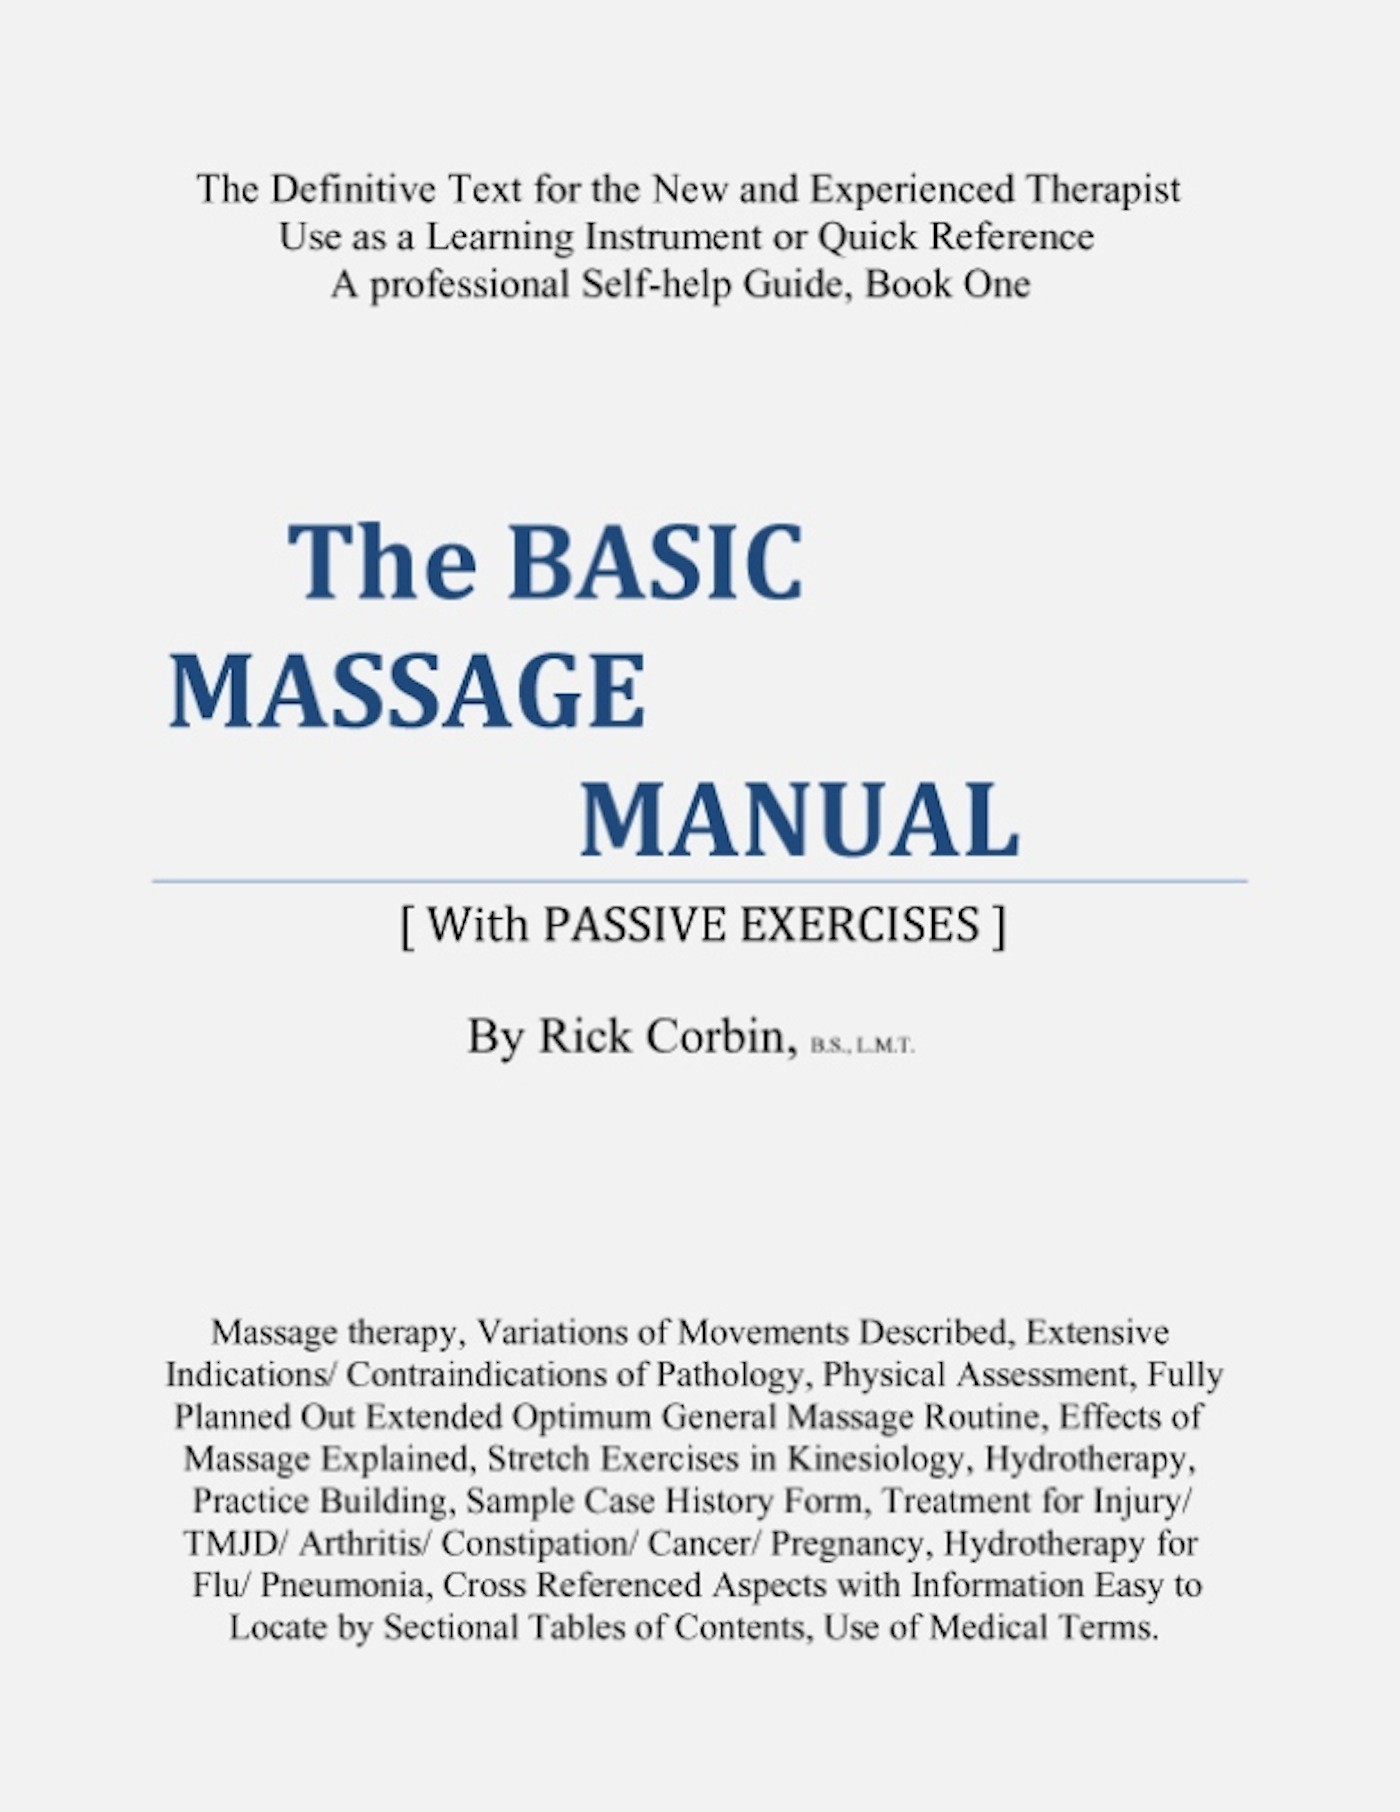 The Basic Massage Manual [With Passive Exercises] Book One